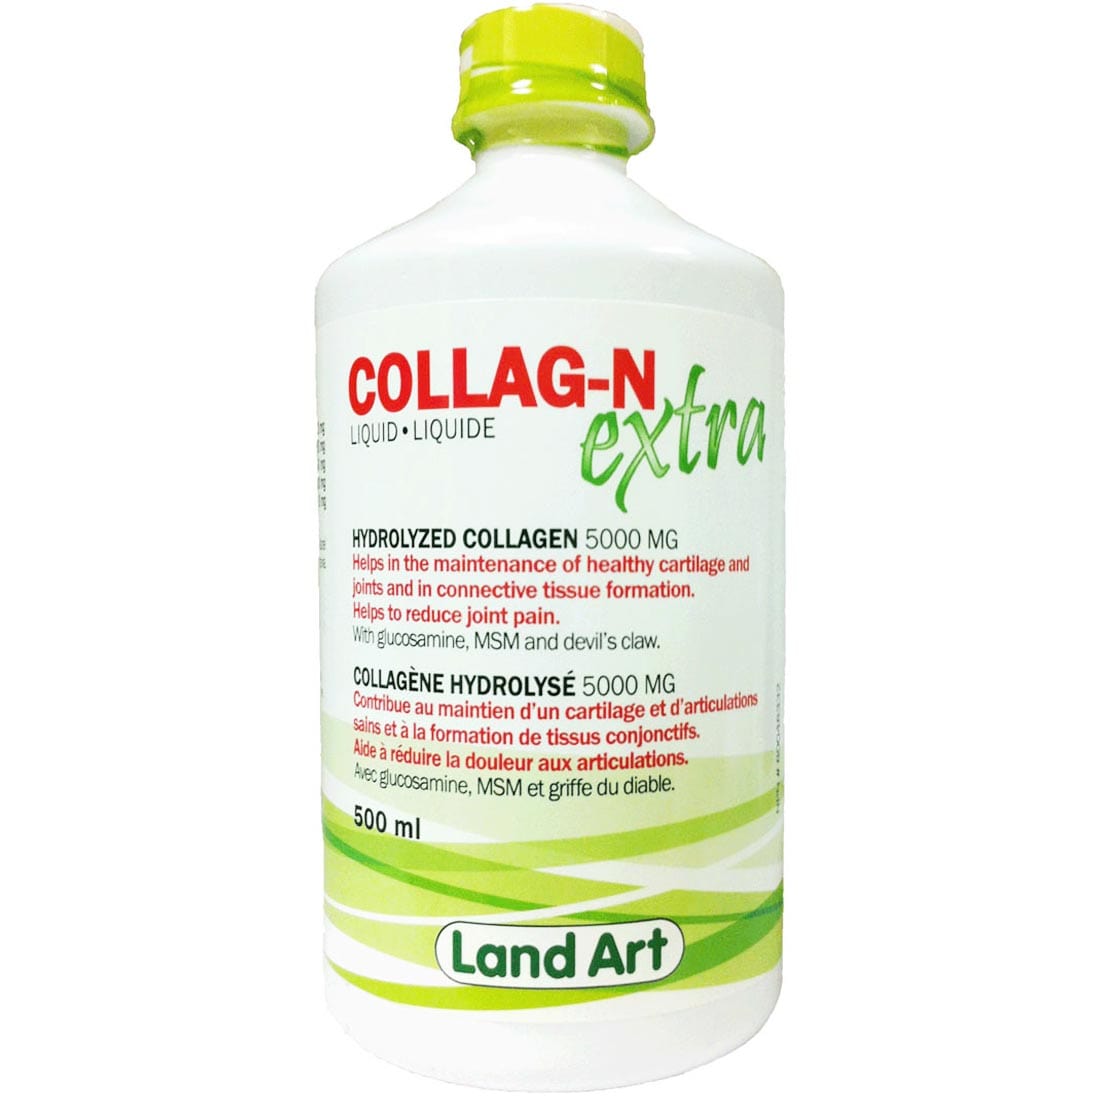 Land Art Collag-N Extra (Liquid Collagen 5000mg with Glucosamine, MSM and Devils Claw), 500ml